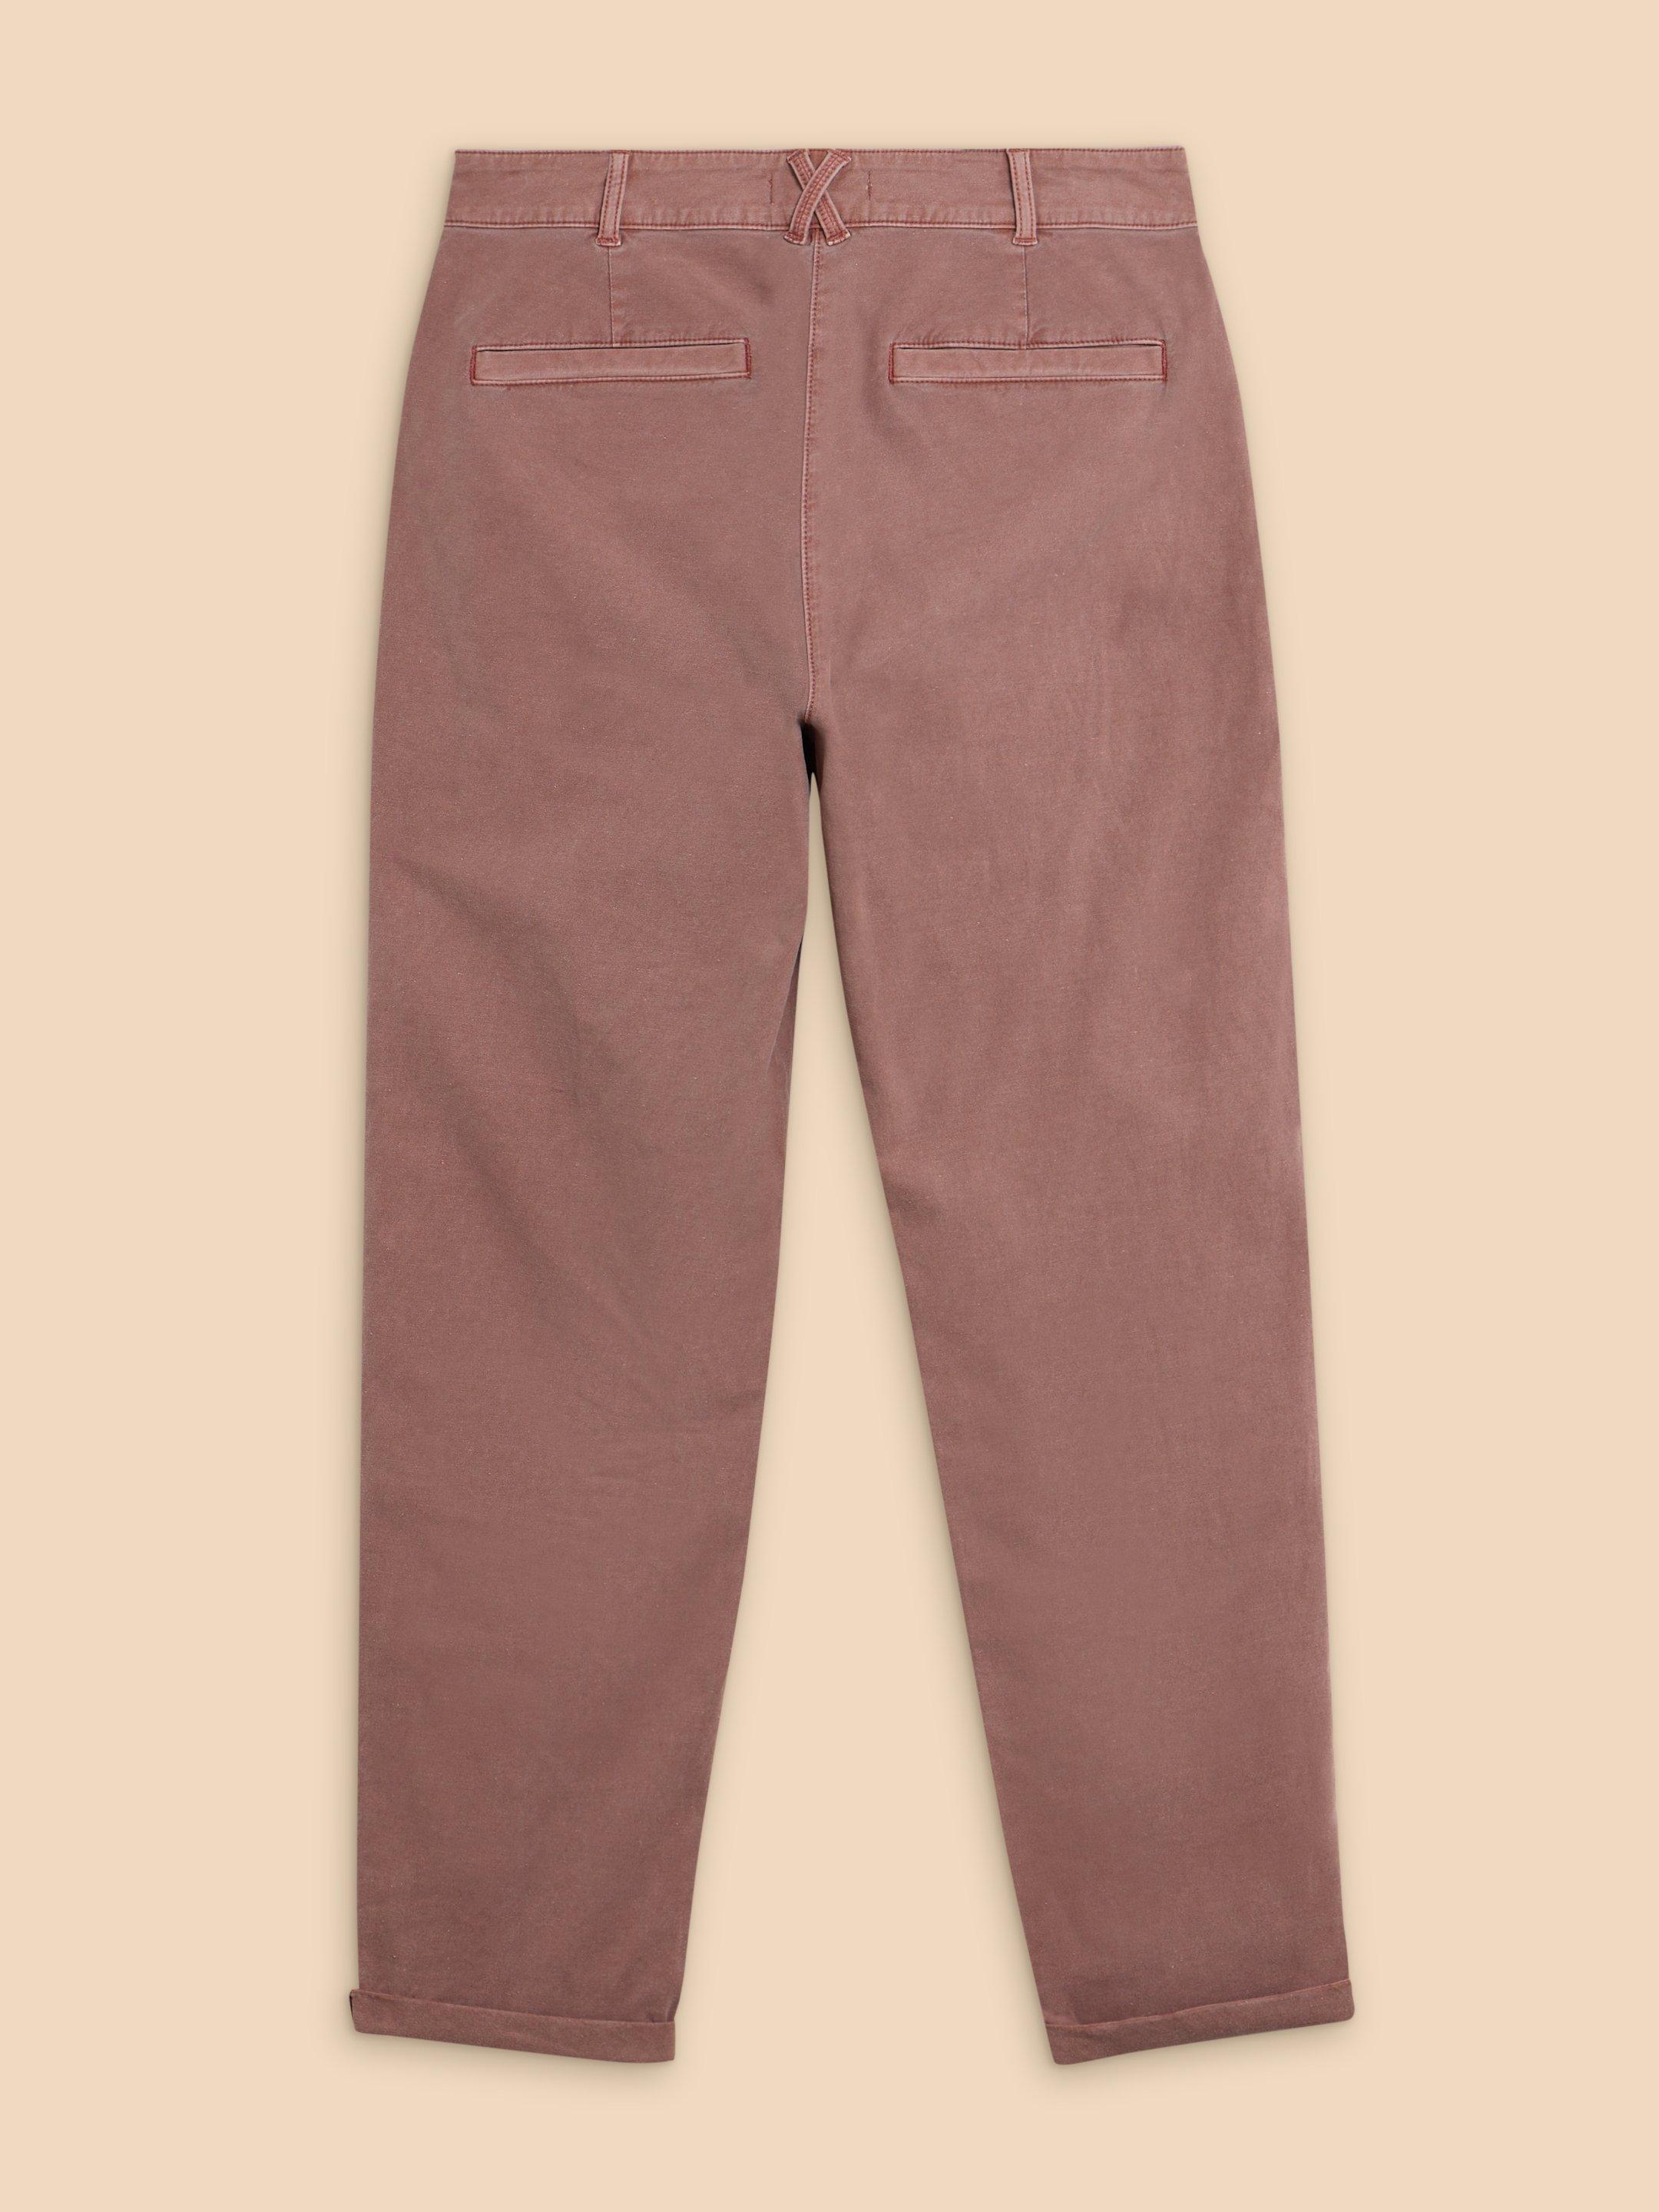 Twister Chino Trouser in DUS PINK - FLAT BACK